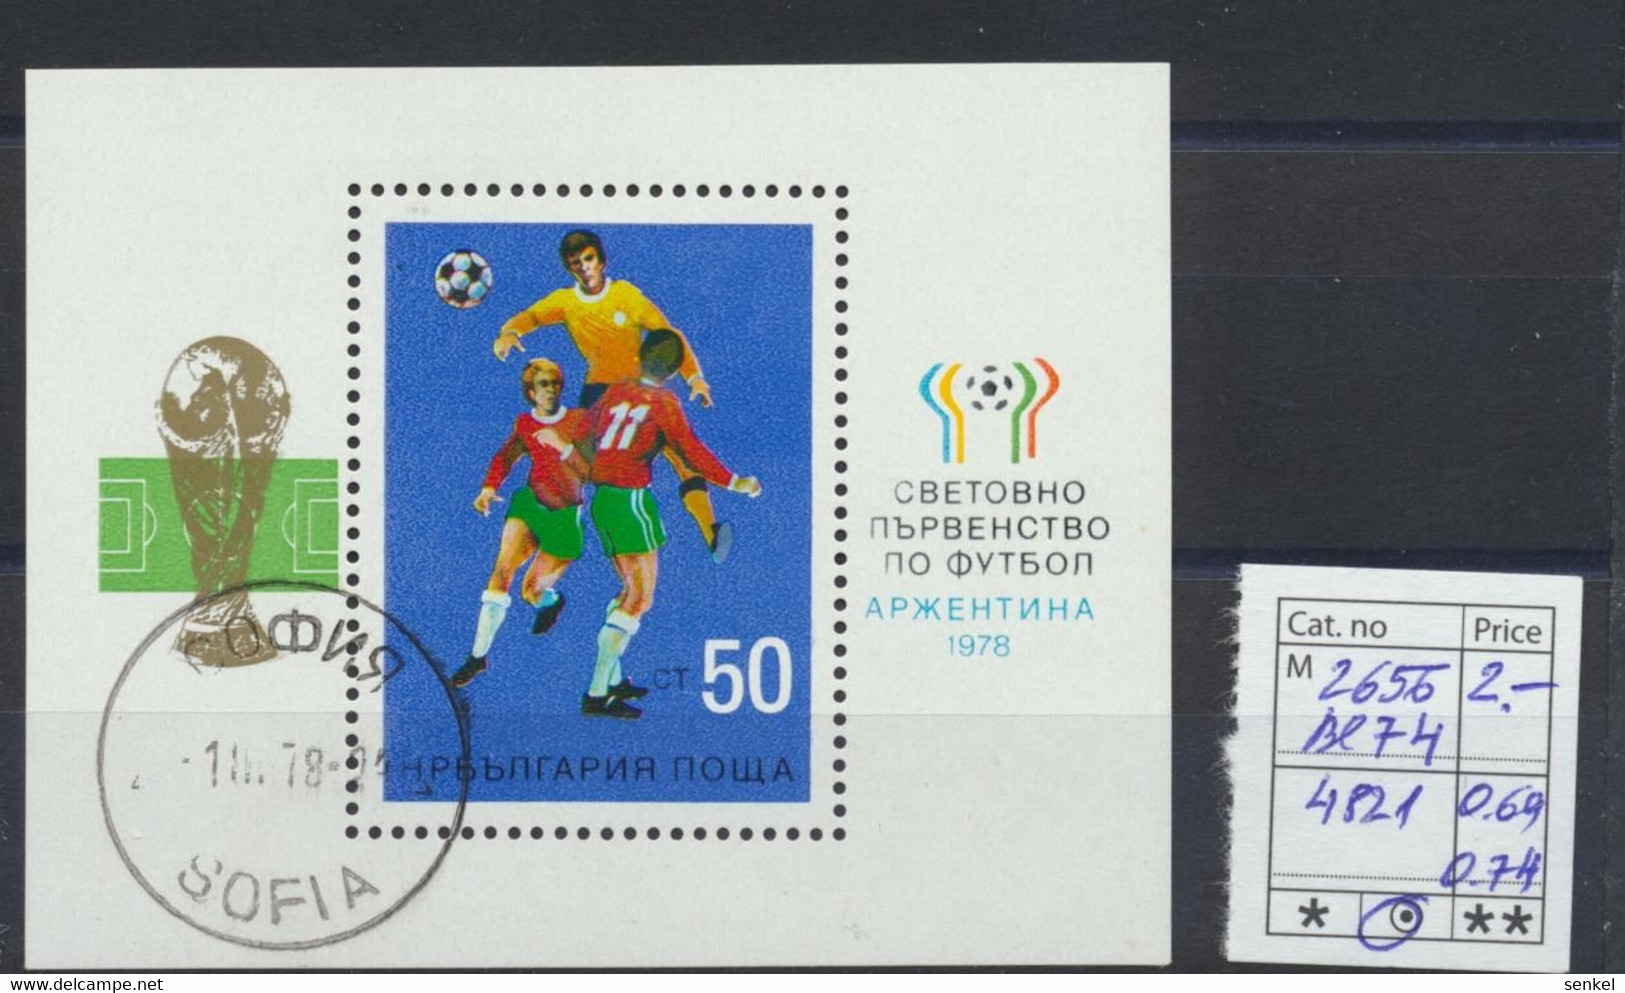 4811 - 4823 Bulgaria 1978 different stamps university ballet art painting exhibition football